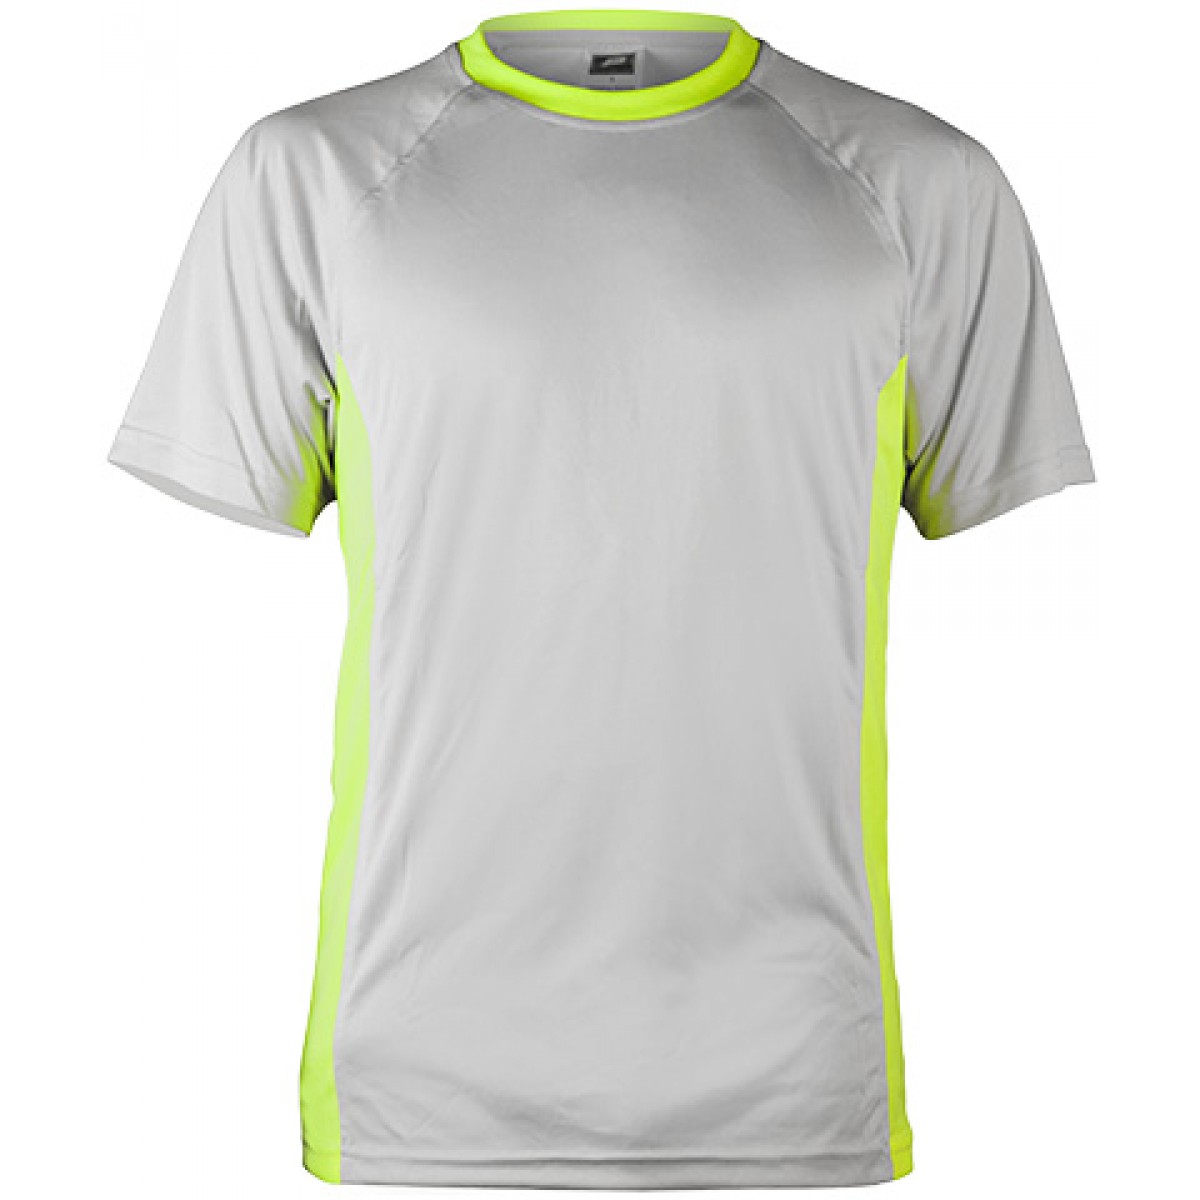 Short Sleeve Performance Fit with Flat-back Mesh Side Insert